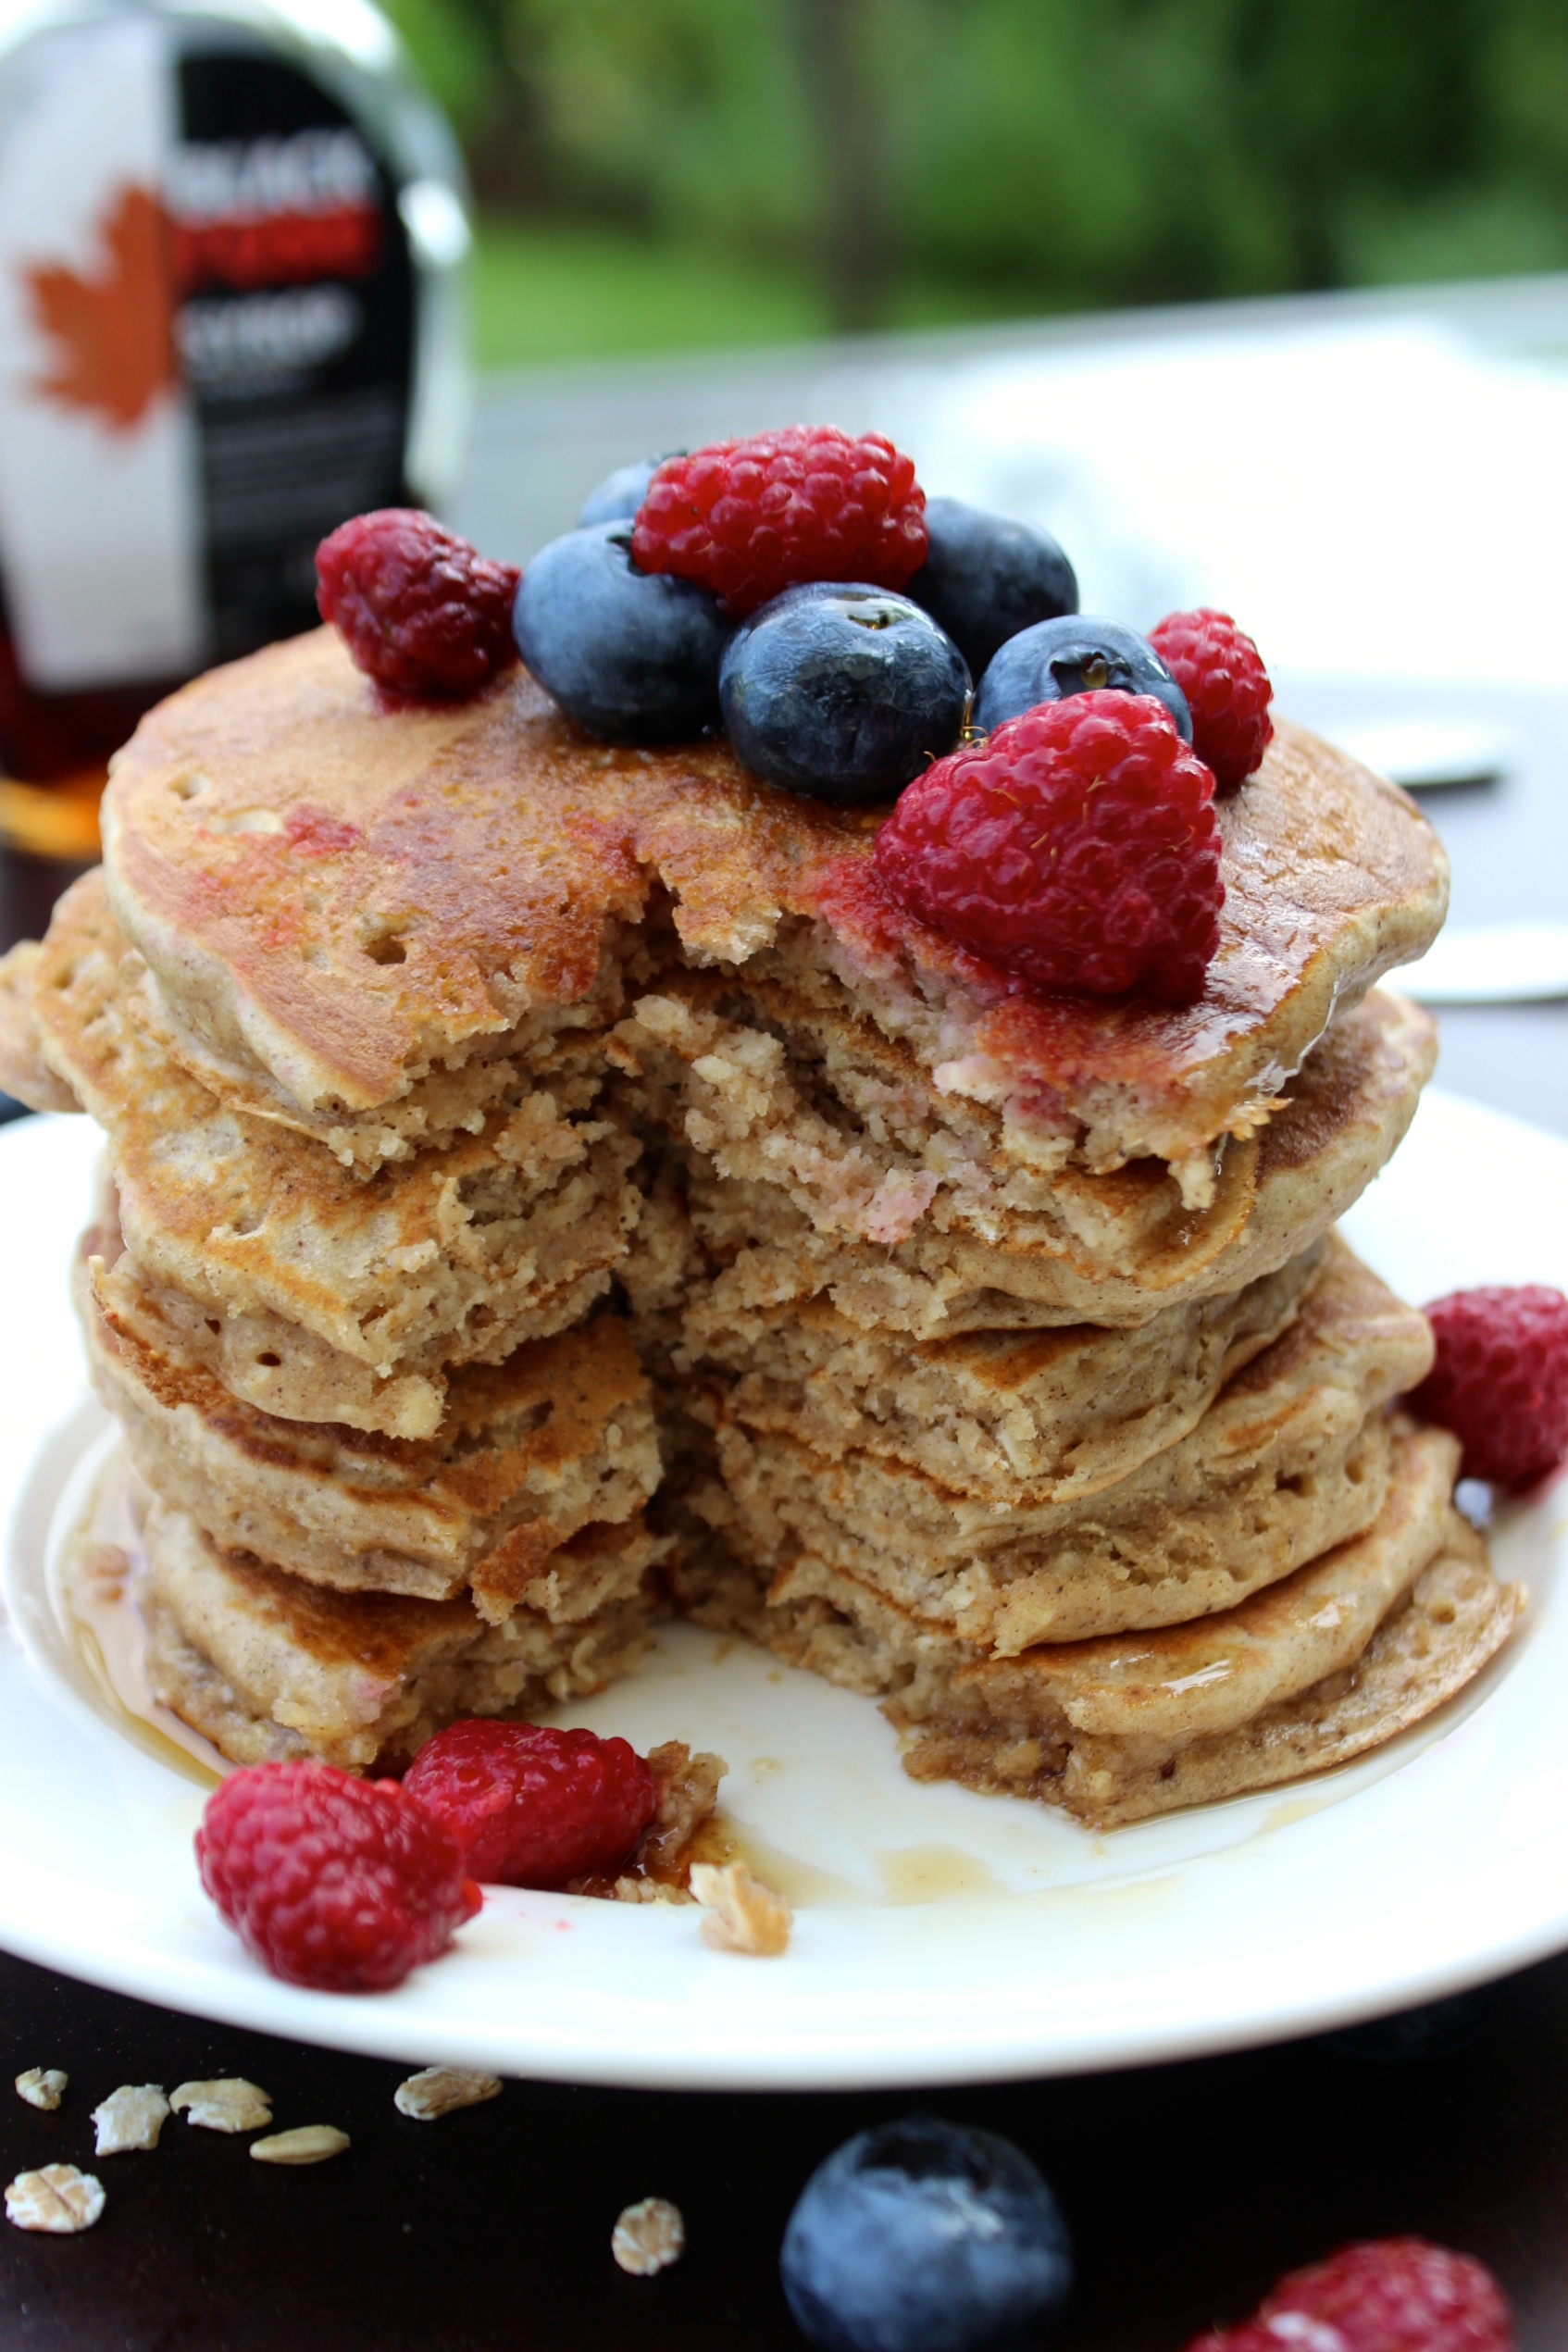 Thick, Fluffy Oatmeal Pancakes... and Food Trucks - Hot Chocolate Hits